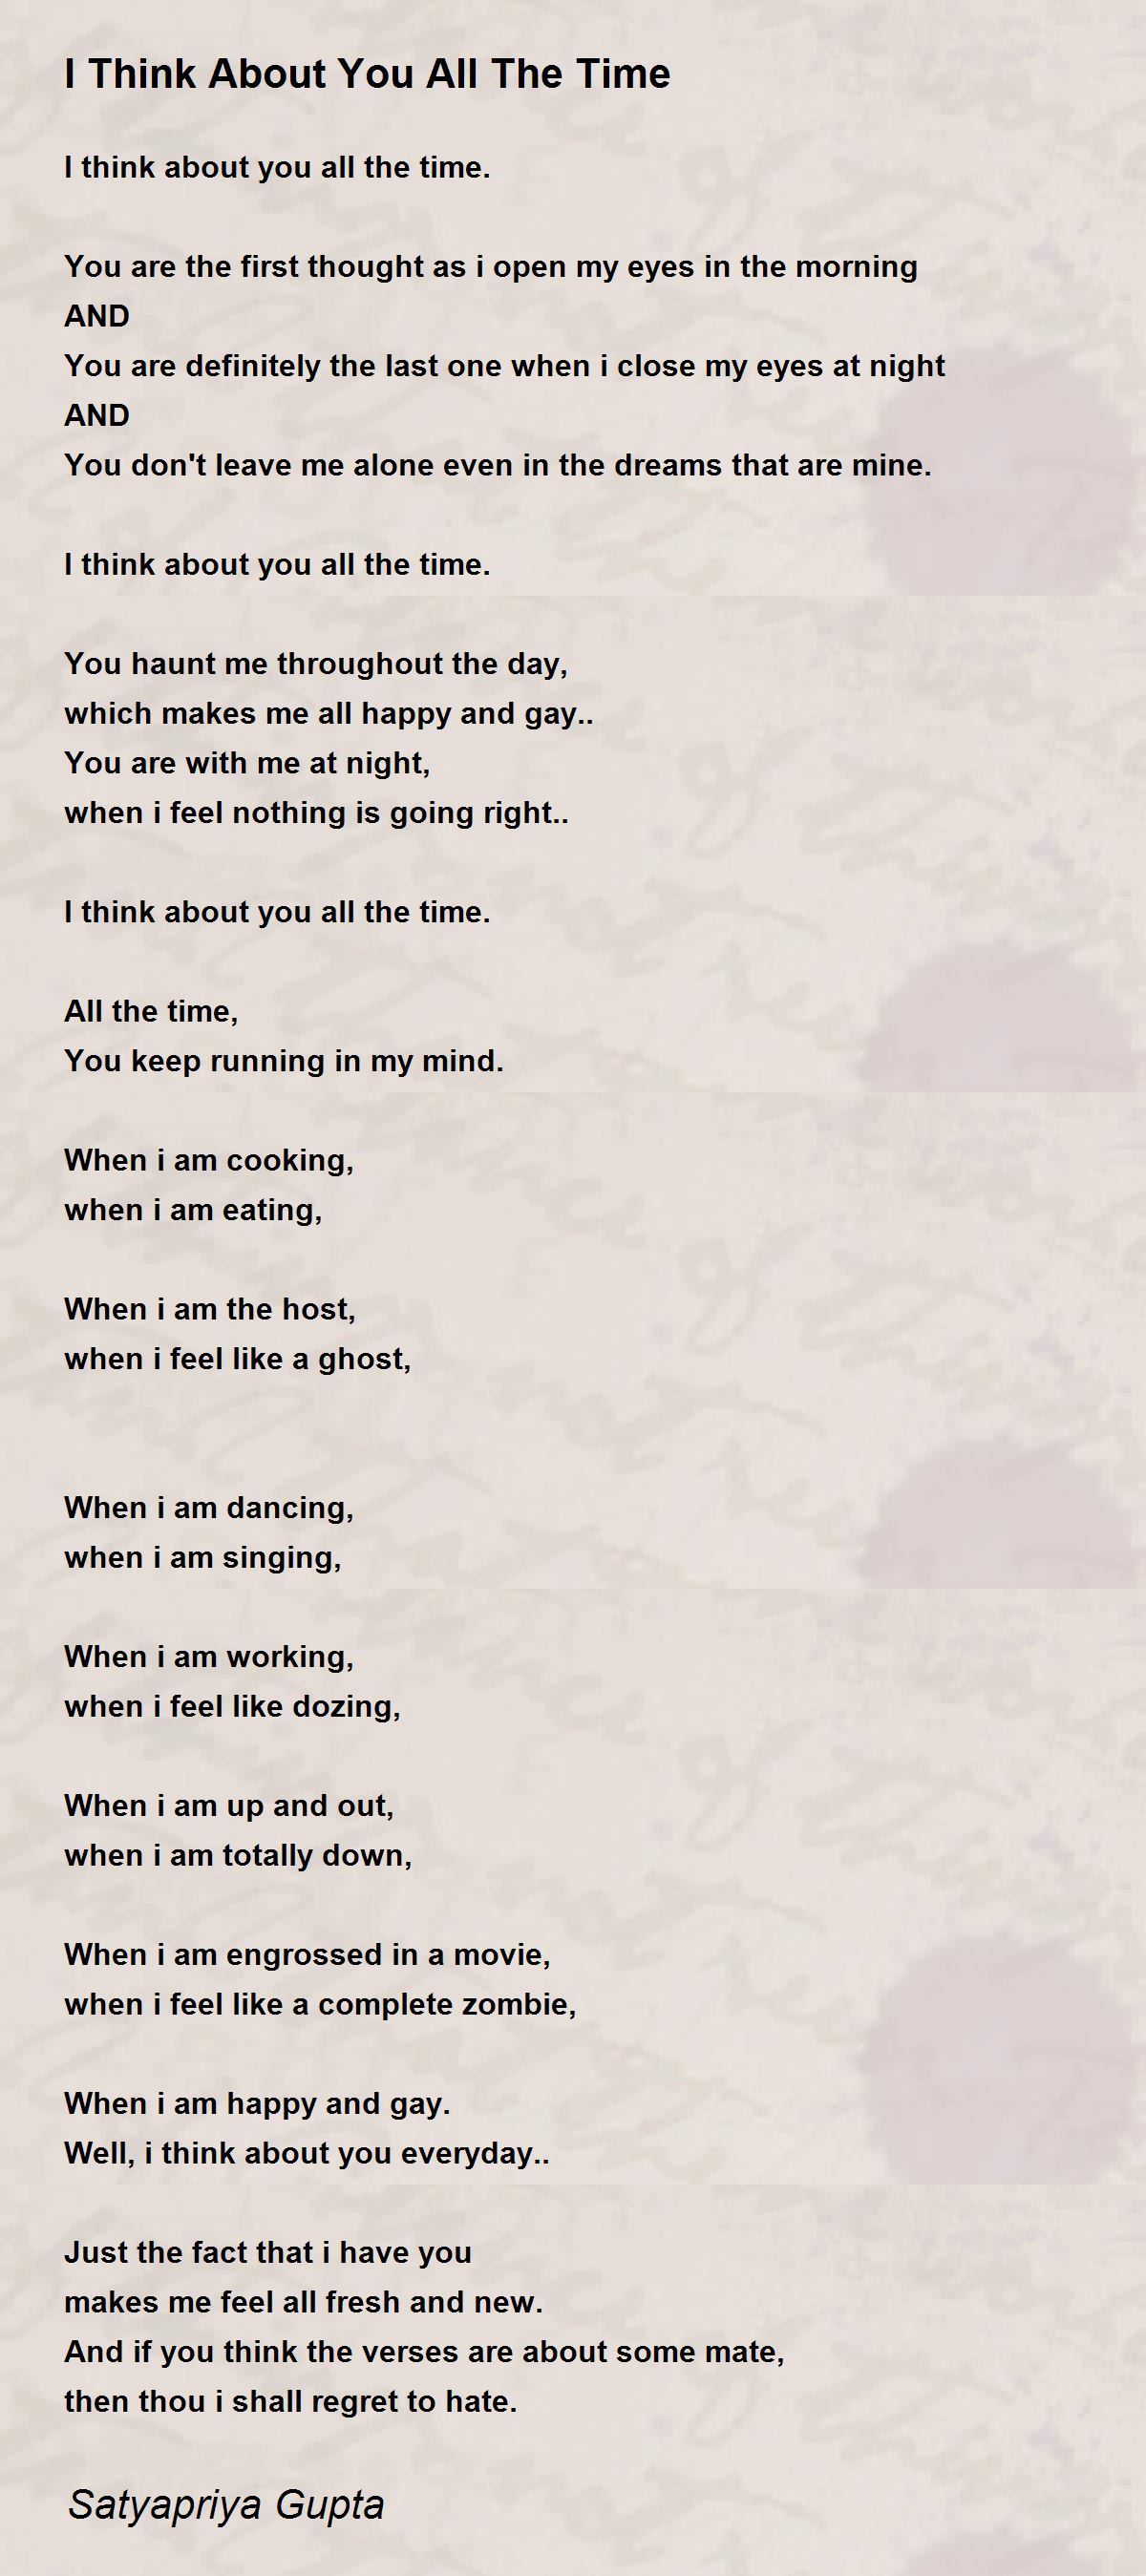 I About You The Time - Think About You All The Time Poem by Satyapriya Gupta